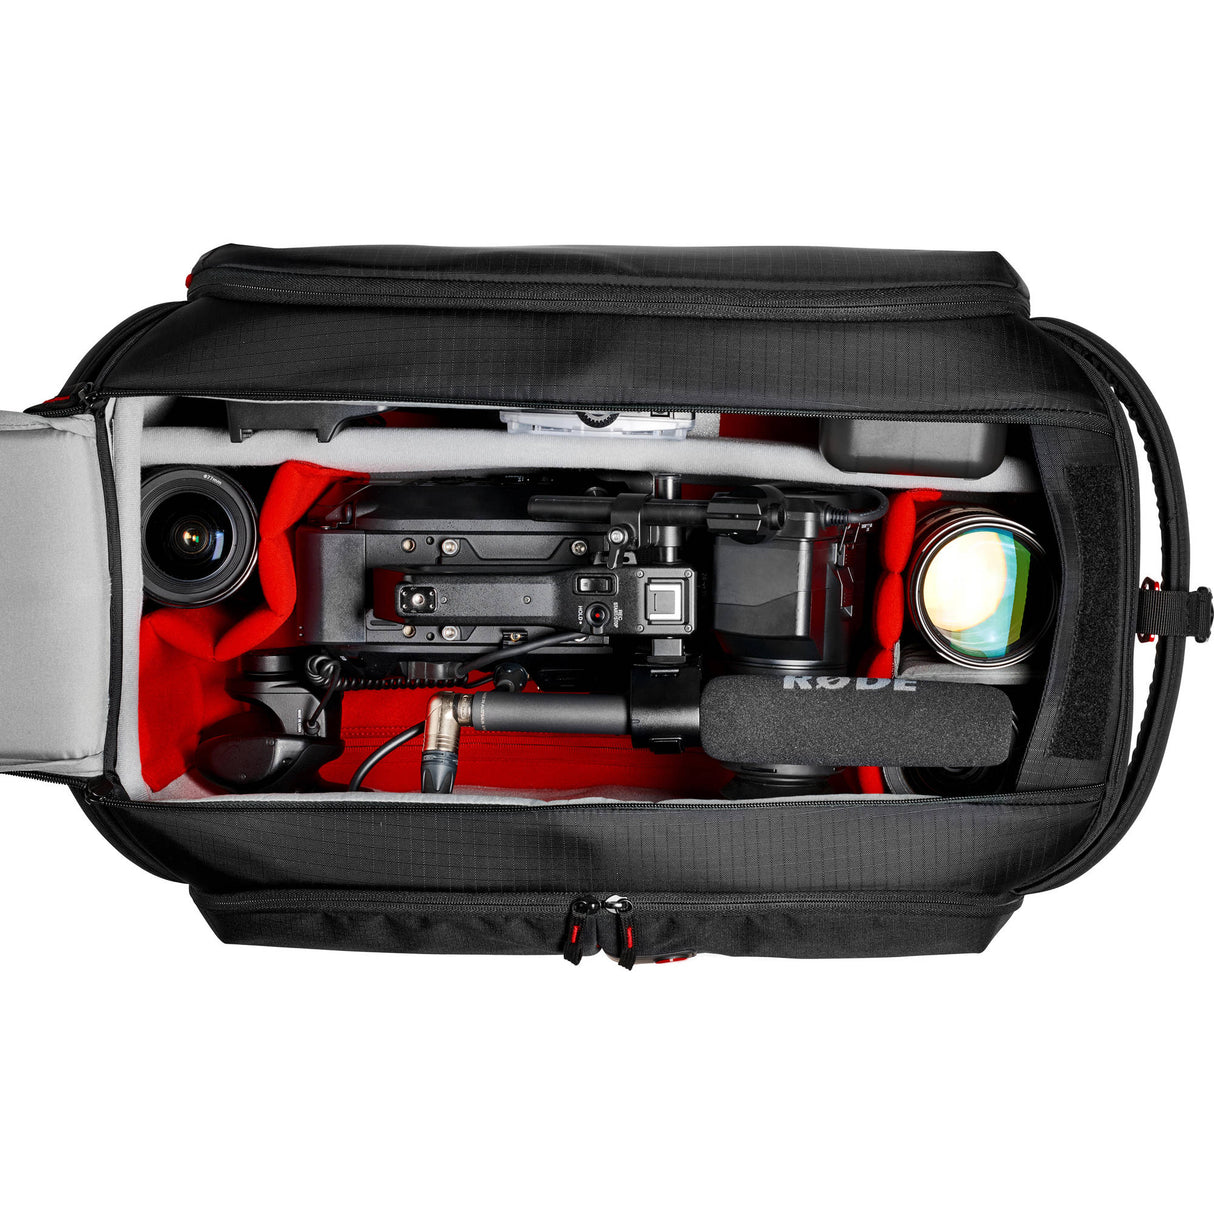 Manfrotto 195N Pro Light Camcorder Case for Sony PXW-FS7, ENG, & VDLSR Cameras